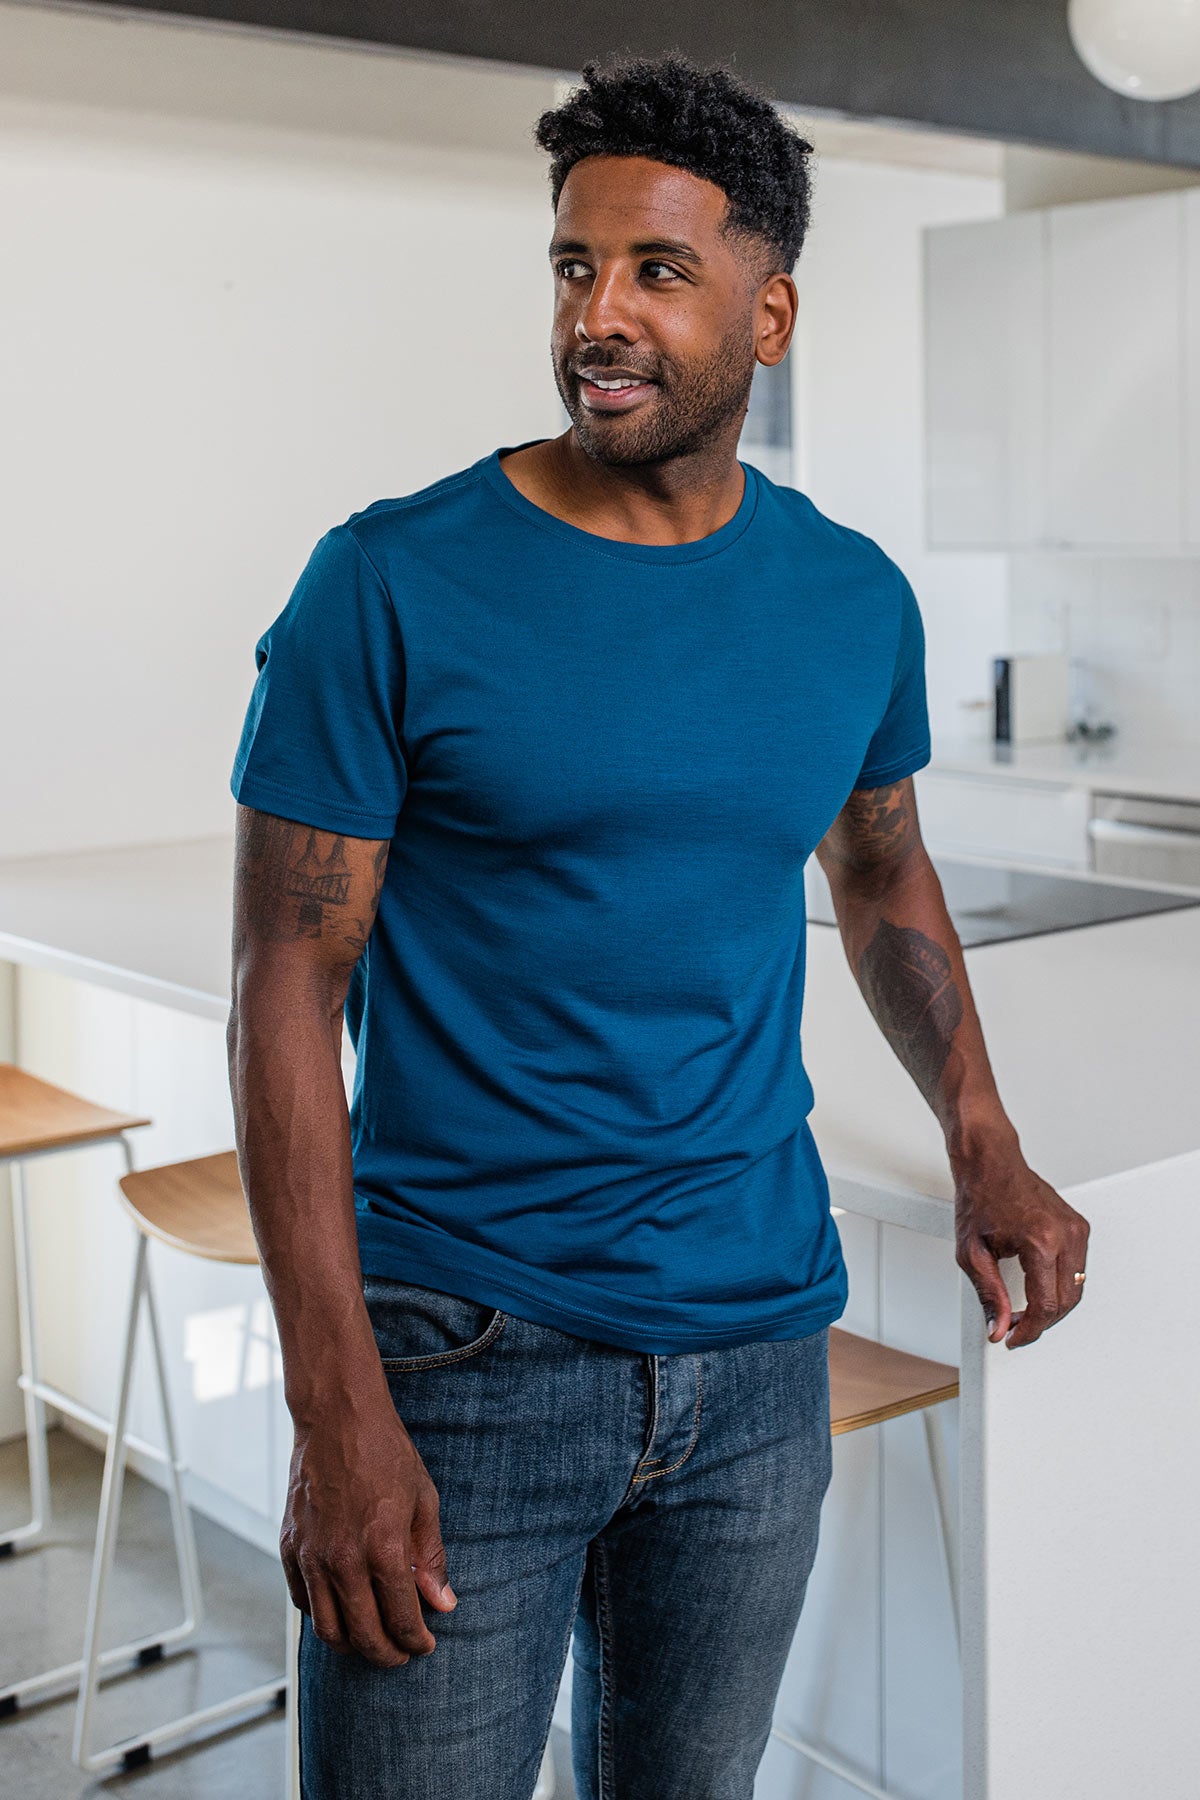 A man standing and leaning against a countertop, looking to the side and wearing Yala Superfine Merino Wool Short Sleeve Tee in Lapis